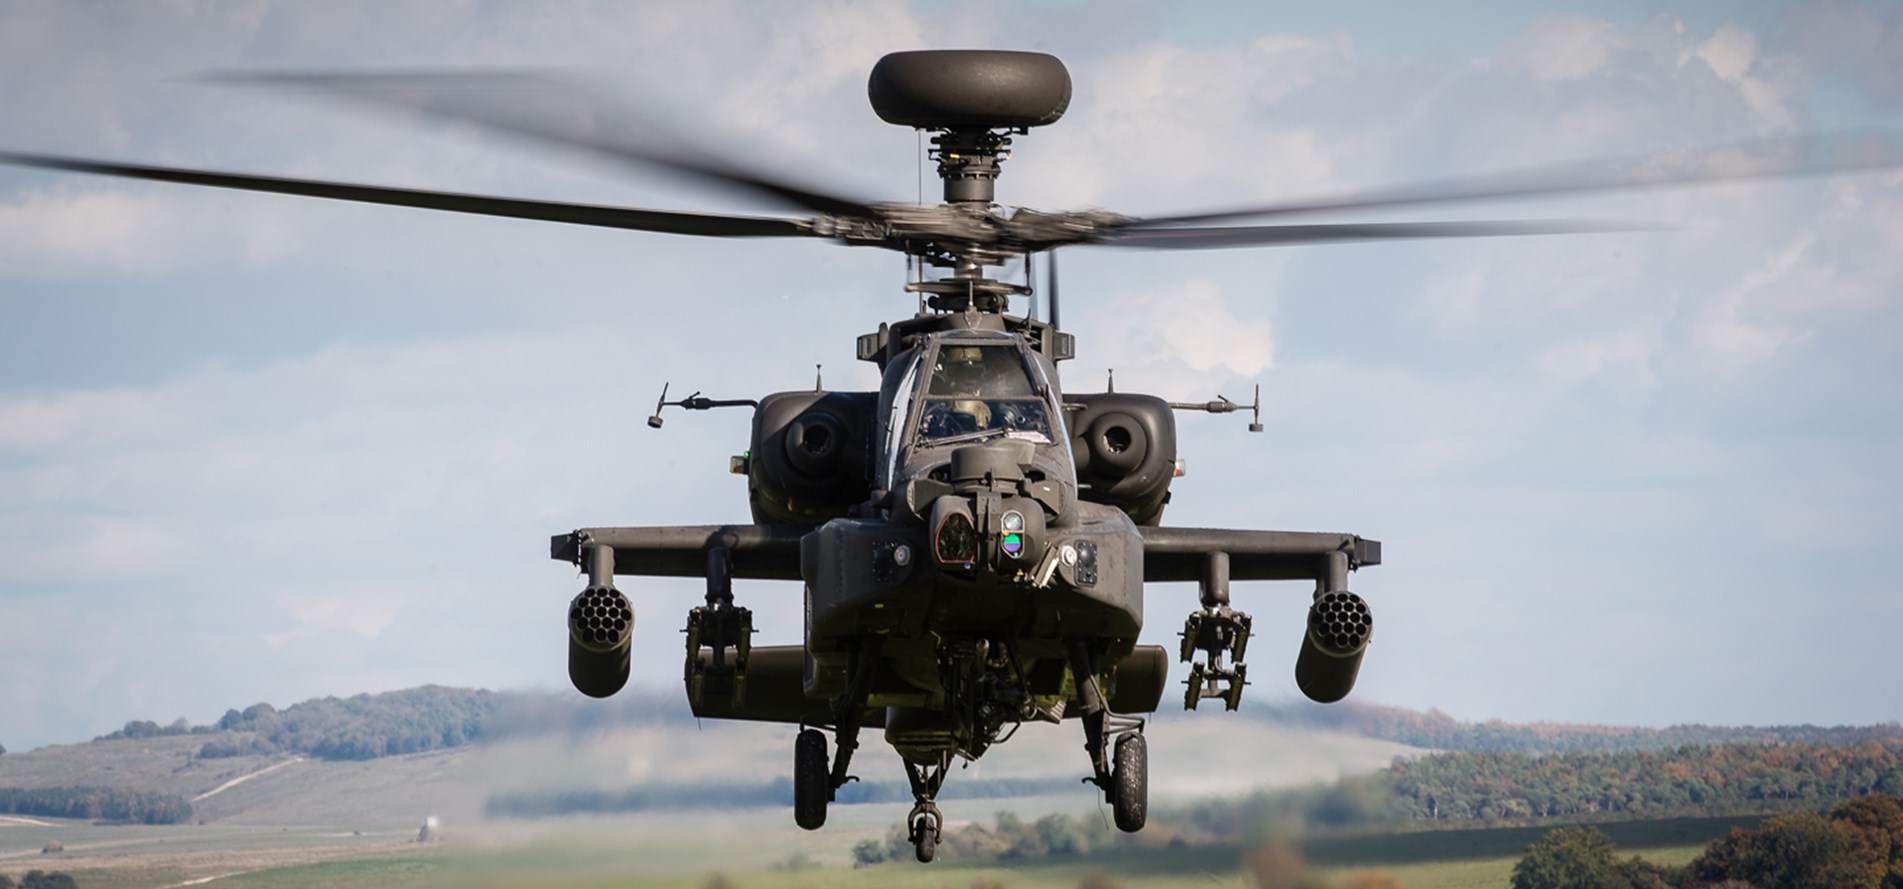 British Army Apache Attack Helicopter